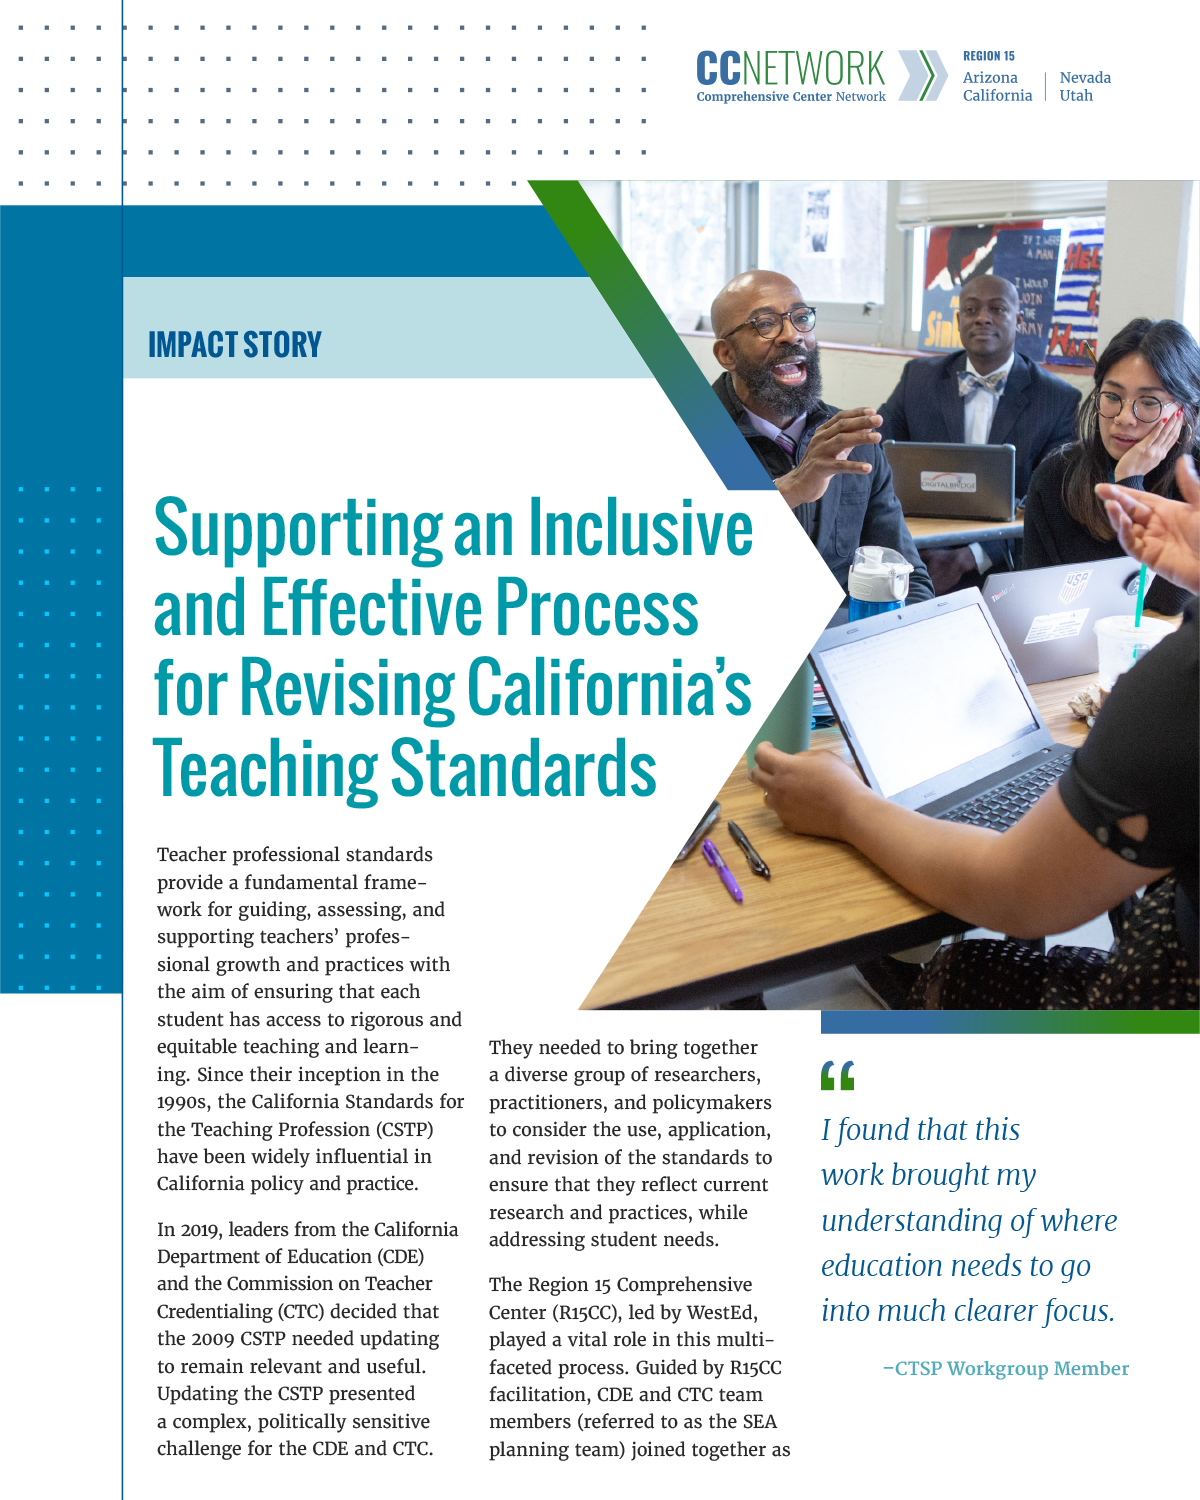 Supporting an Inclusive and Effective Process for Revising California's Teaching Standards